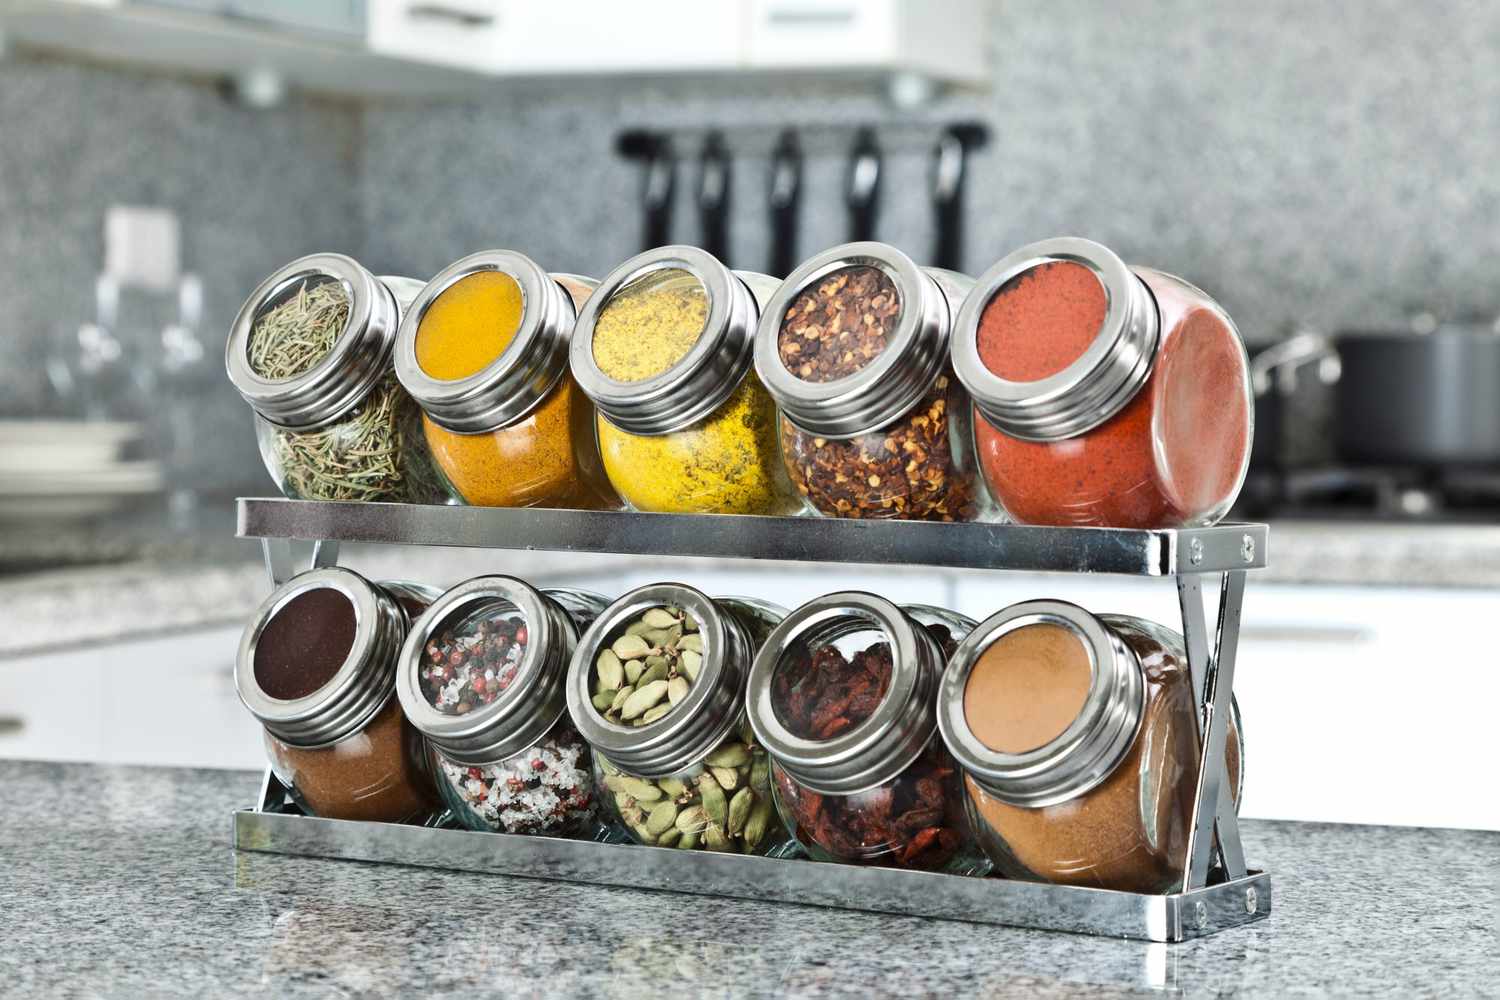 Spice Storage Ideas: 10 Options For Order In A Kitchen